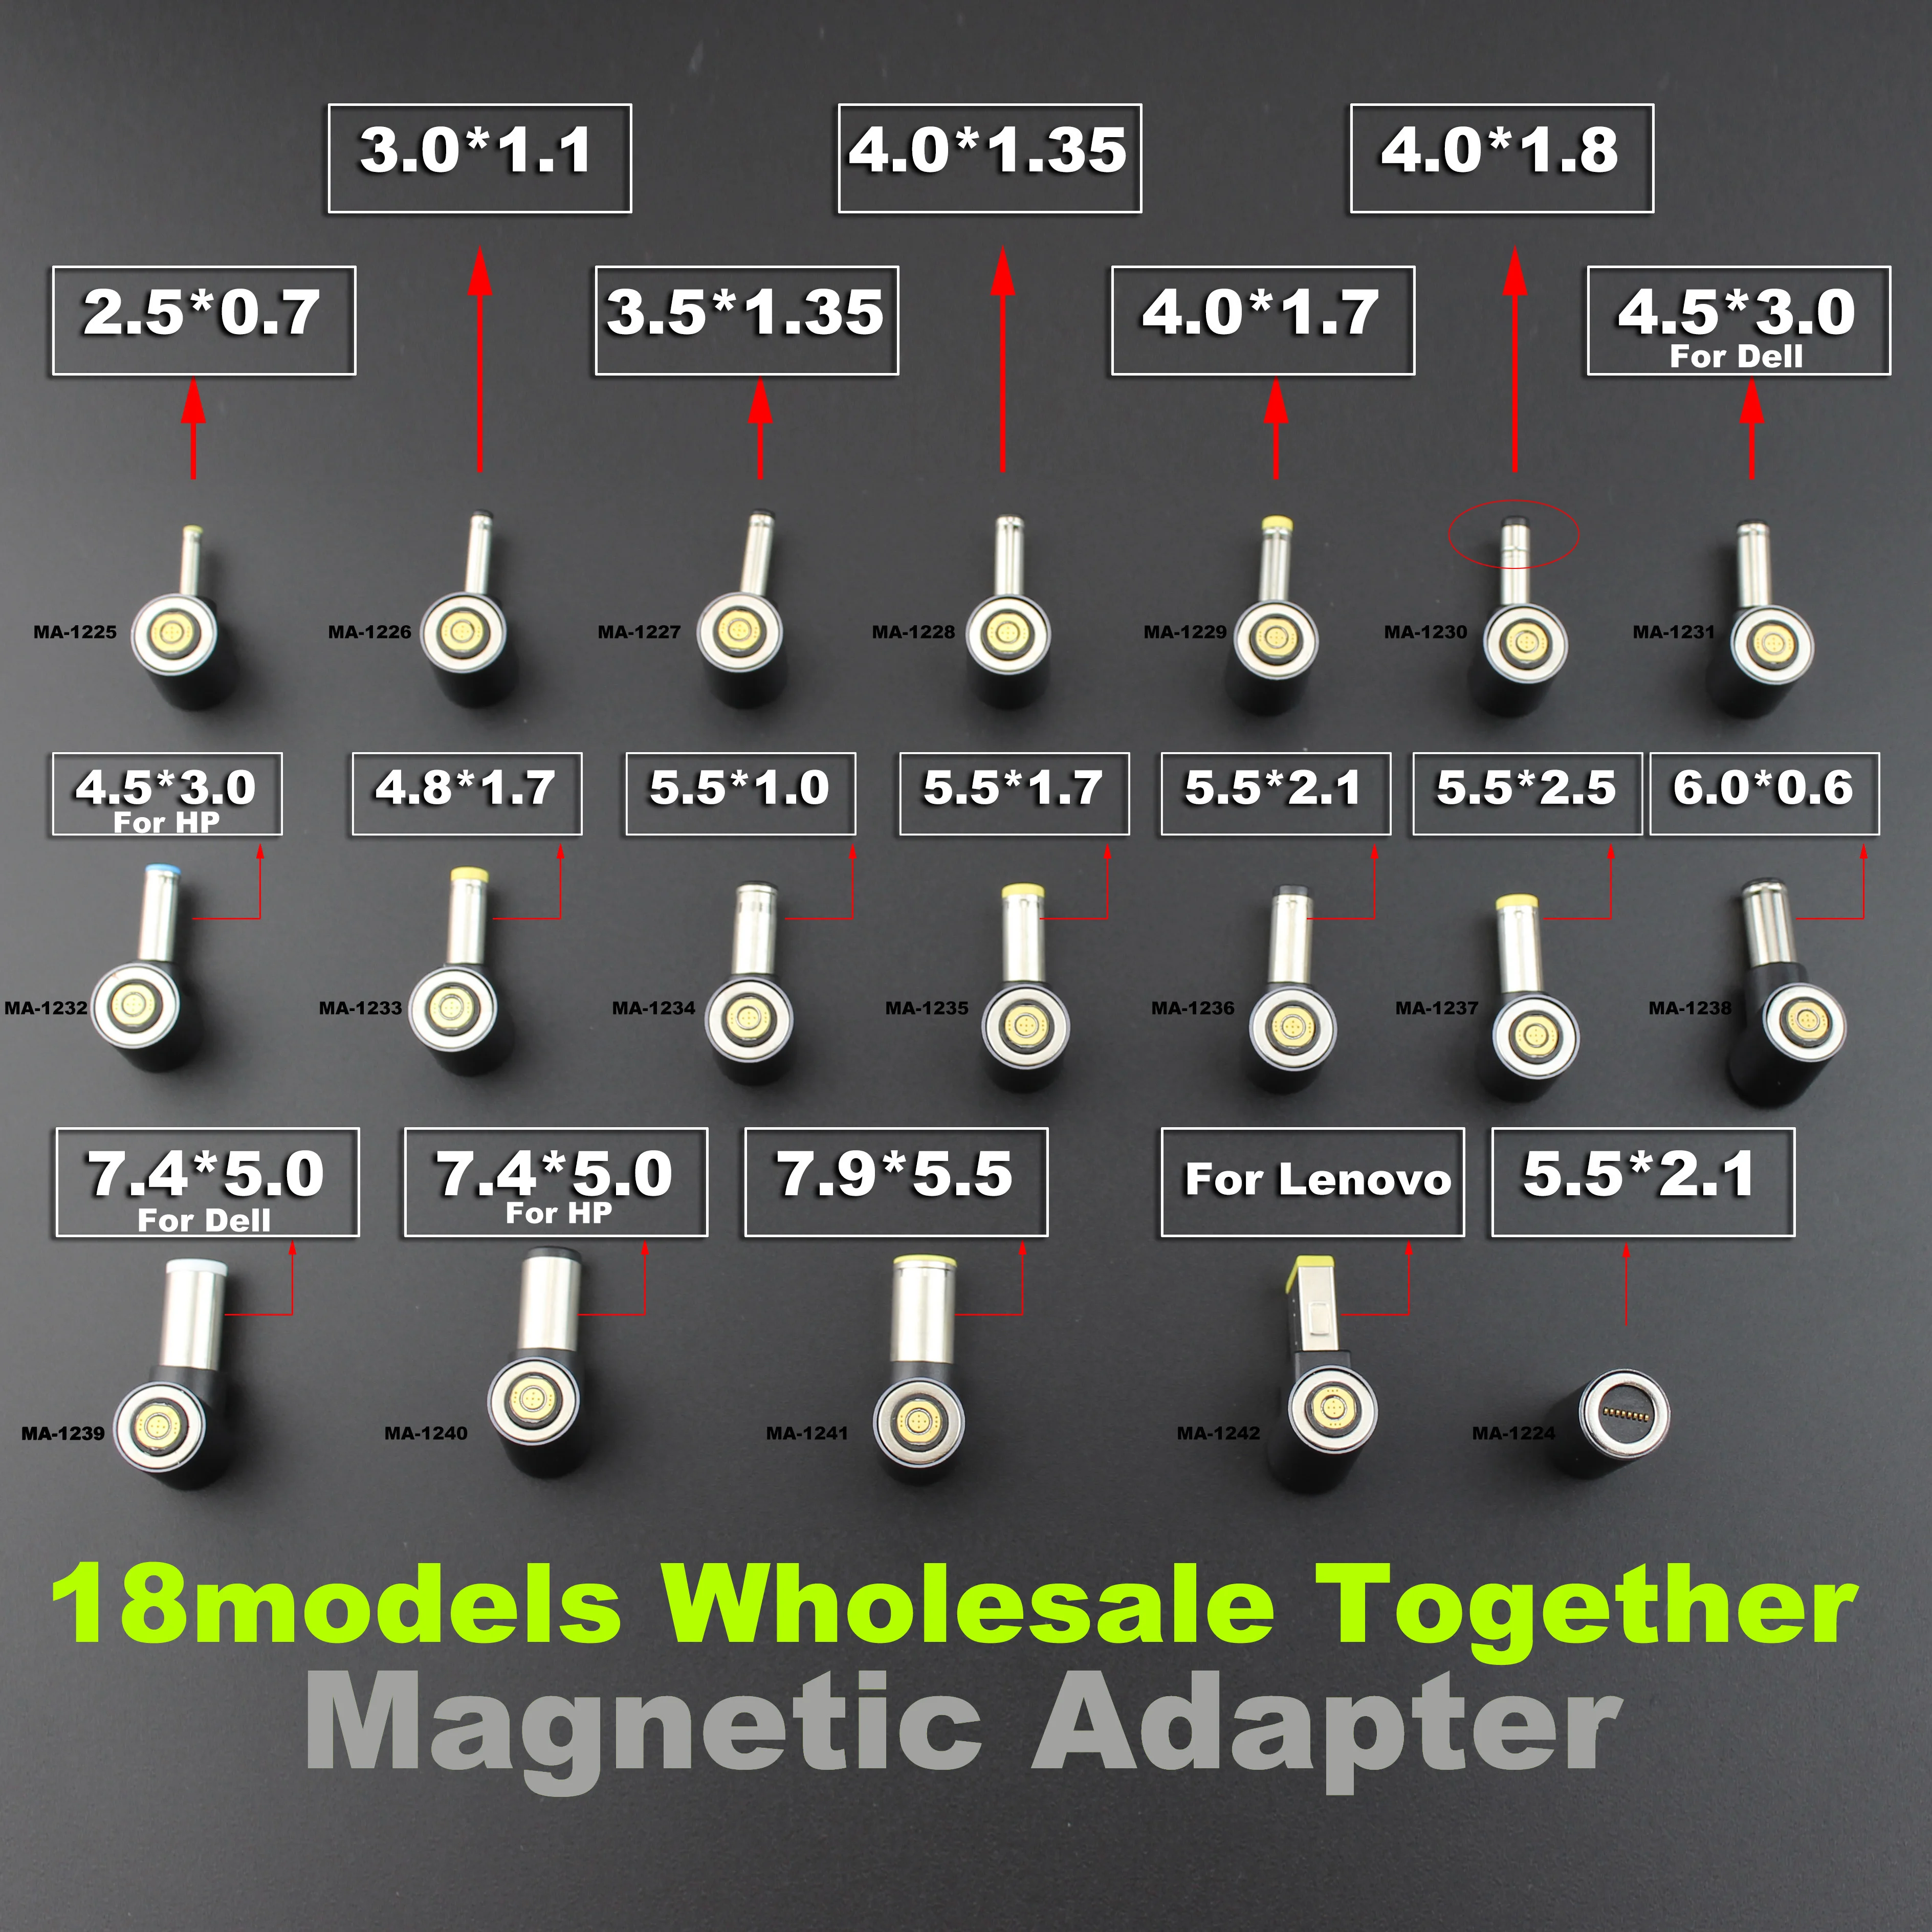 

18models wholesale together PD to DC 2.5x0.7 7.9x5.5 7.4*5.0 6.0*1.4 6.0*0.6 4.8*1.7 PD Laptop Charge Converter Magnetic Adapter